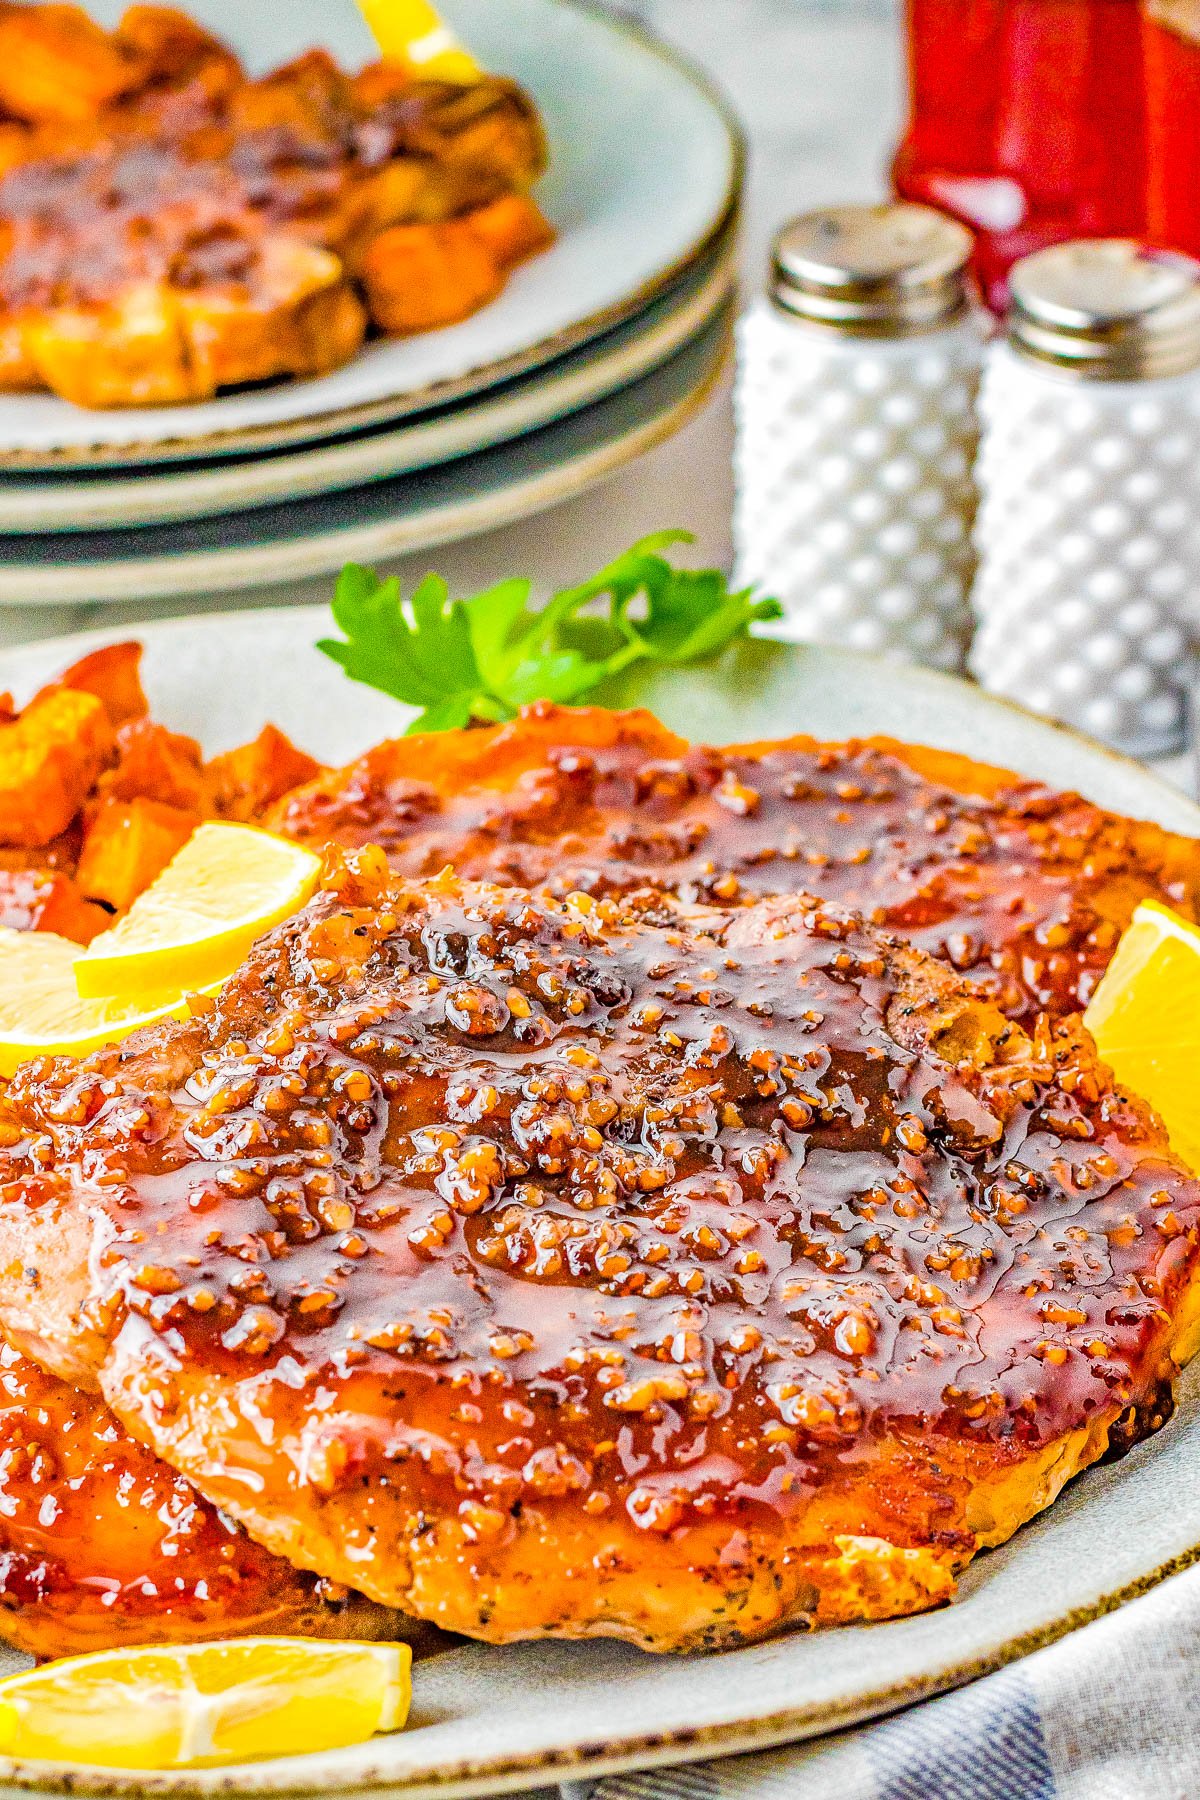 Maple Glazed Pork Chops and Sweet Potatoes - The PERFECT fall-inspired dinner with juicy pork chops that are smothered with the most mouthwatering maple bourbon glaze and cinnamon-and-spiced roasted sweet potatoes on the side! This stunning comfort food recipe is great for family dinners and busy weeknights because it's EASY to make!  